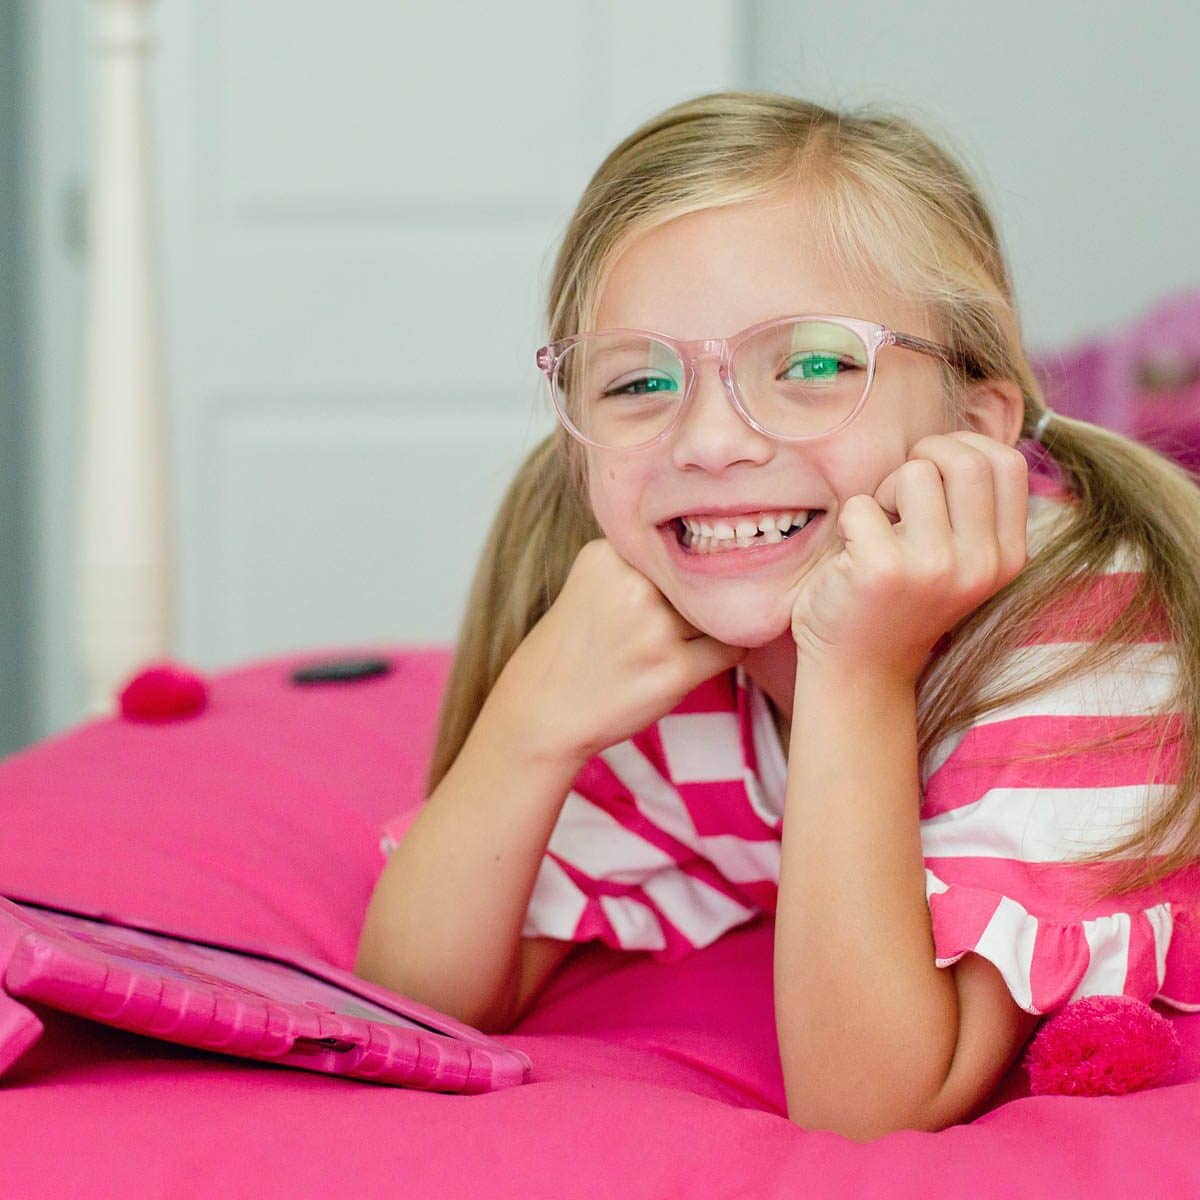 Why Your Family Needs Blue Light Glasses